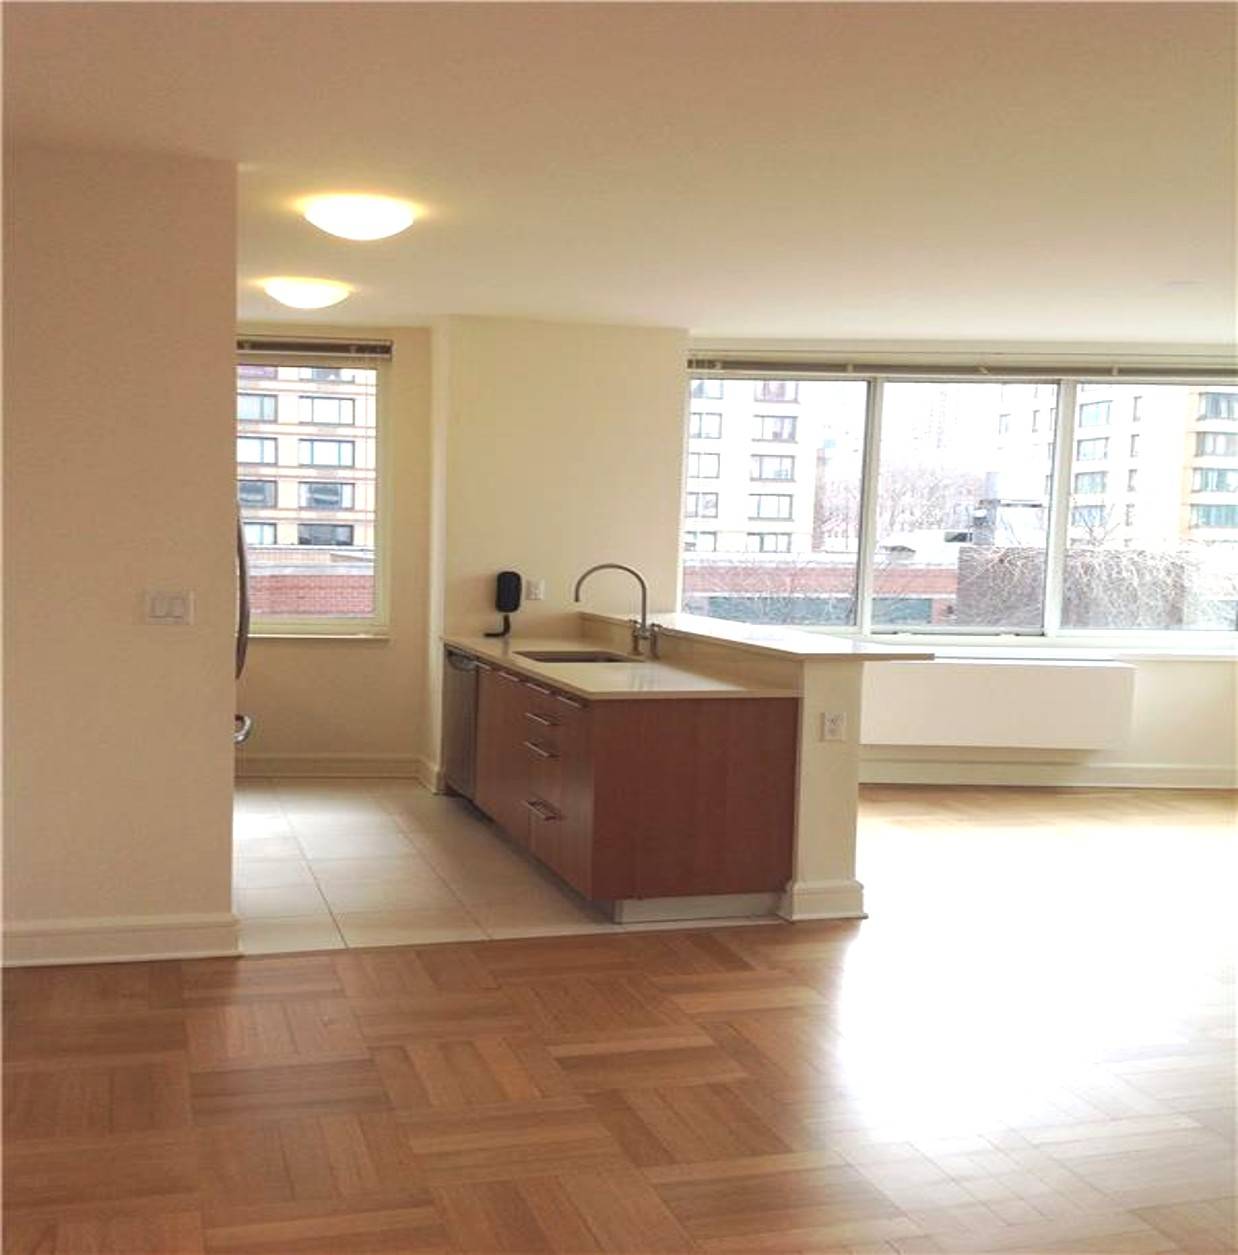 NEW CONSTRUCTION LUXURY 2BR/2BA FOR RENT ON UPPER WEST SIDE